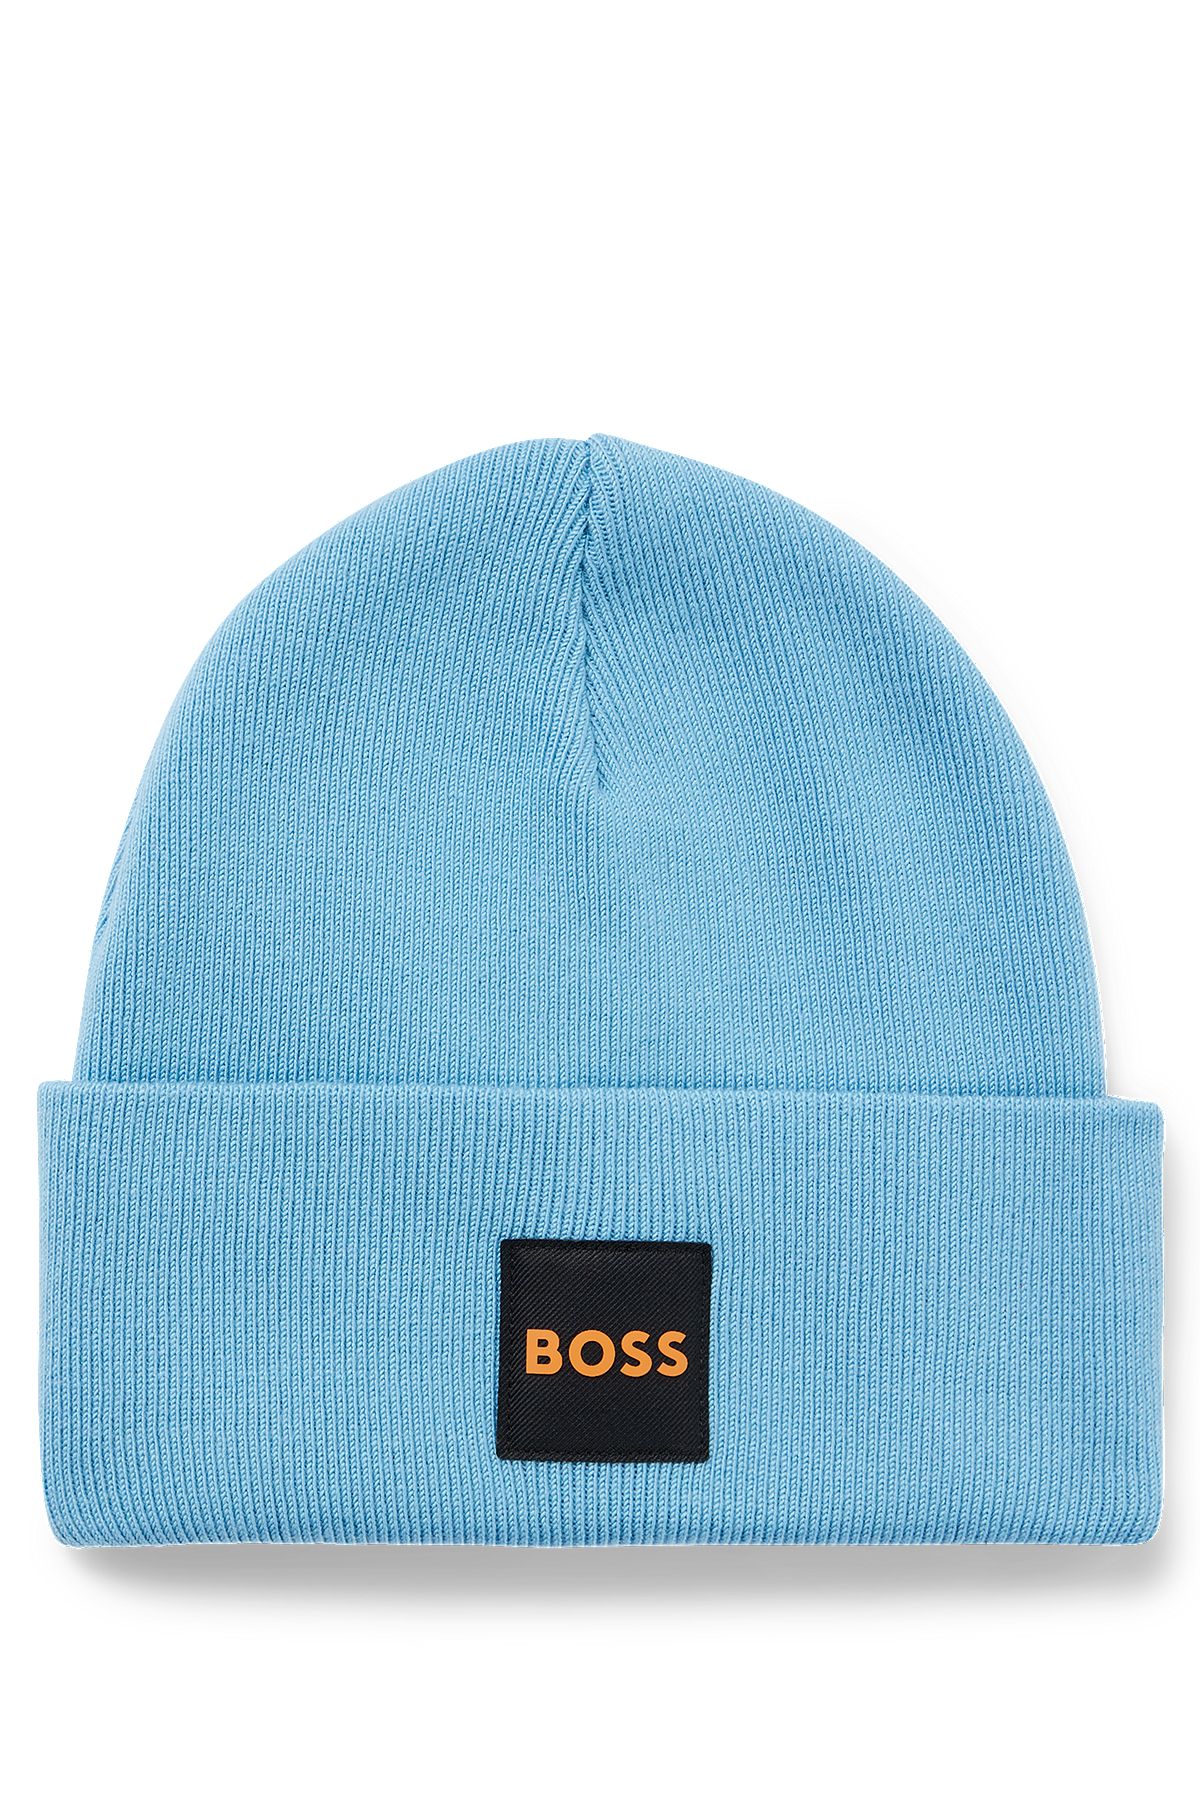 BOSS logo hat Double-layer with - patch beanie